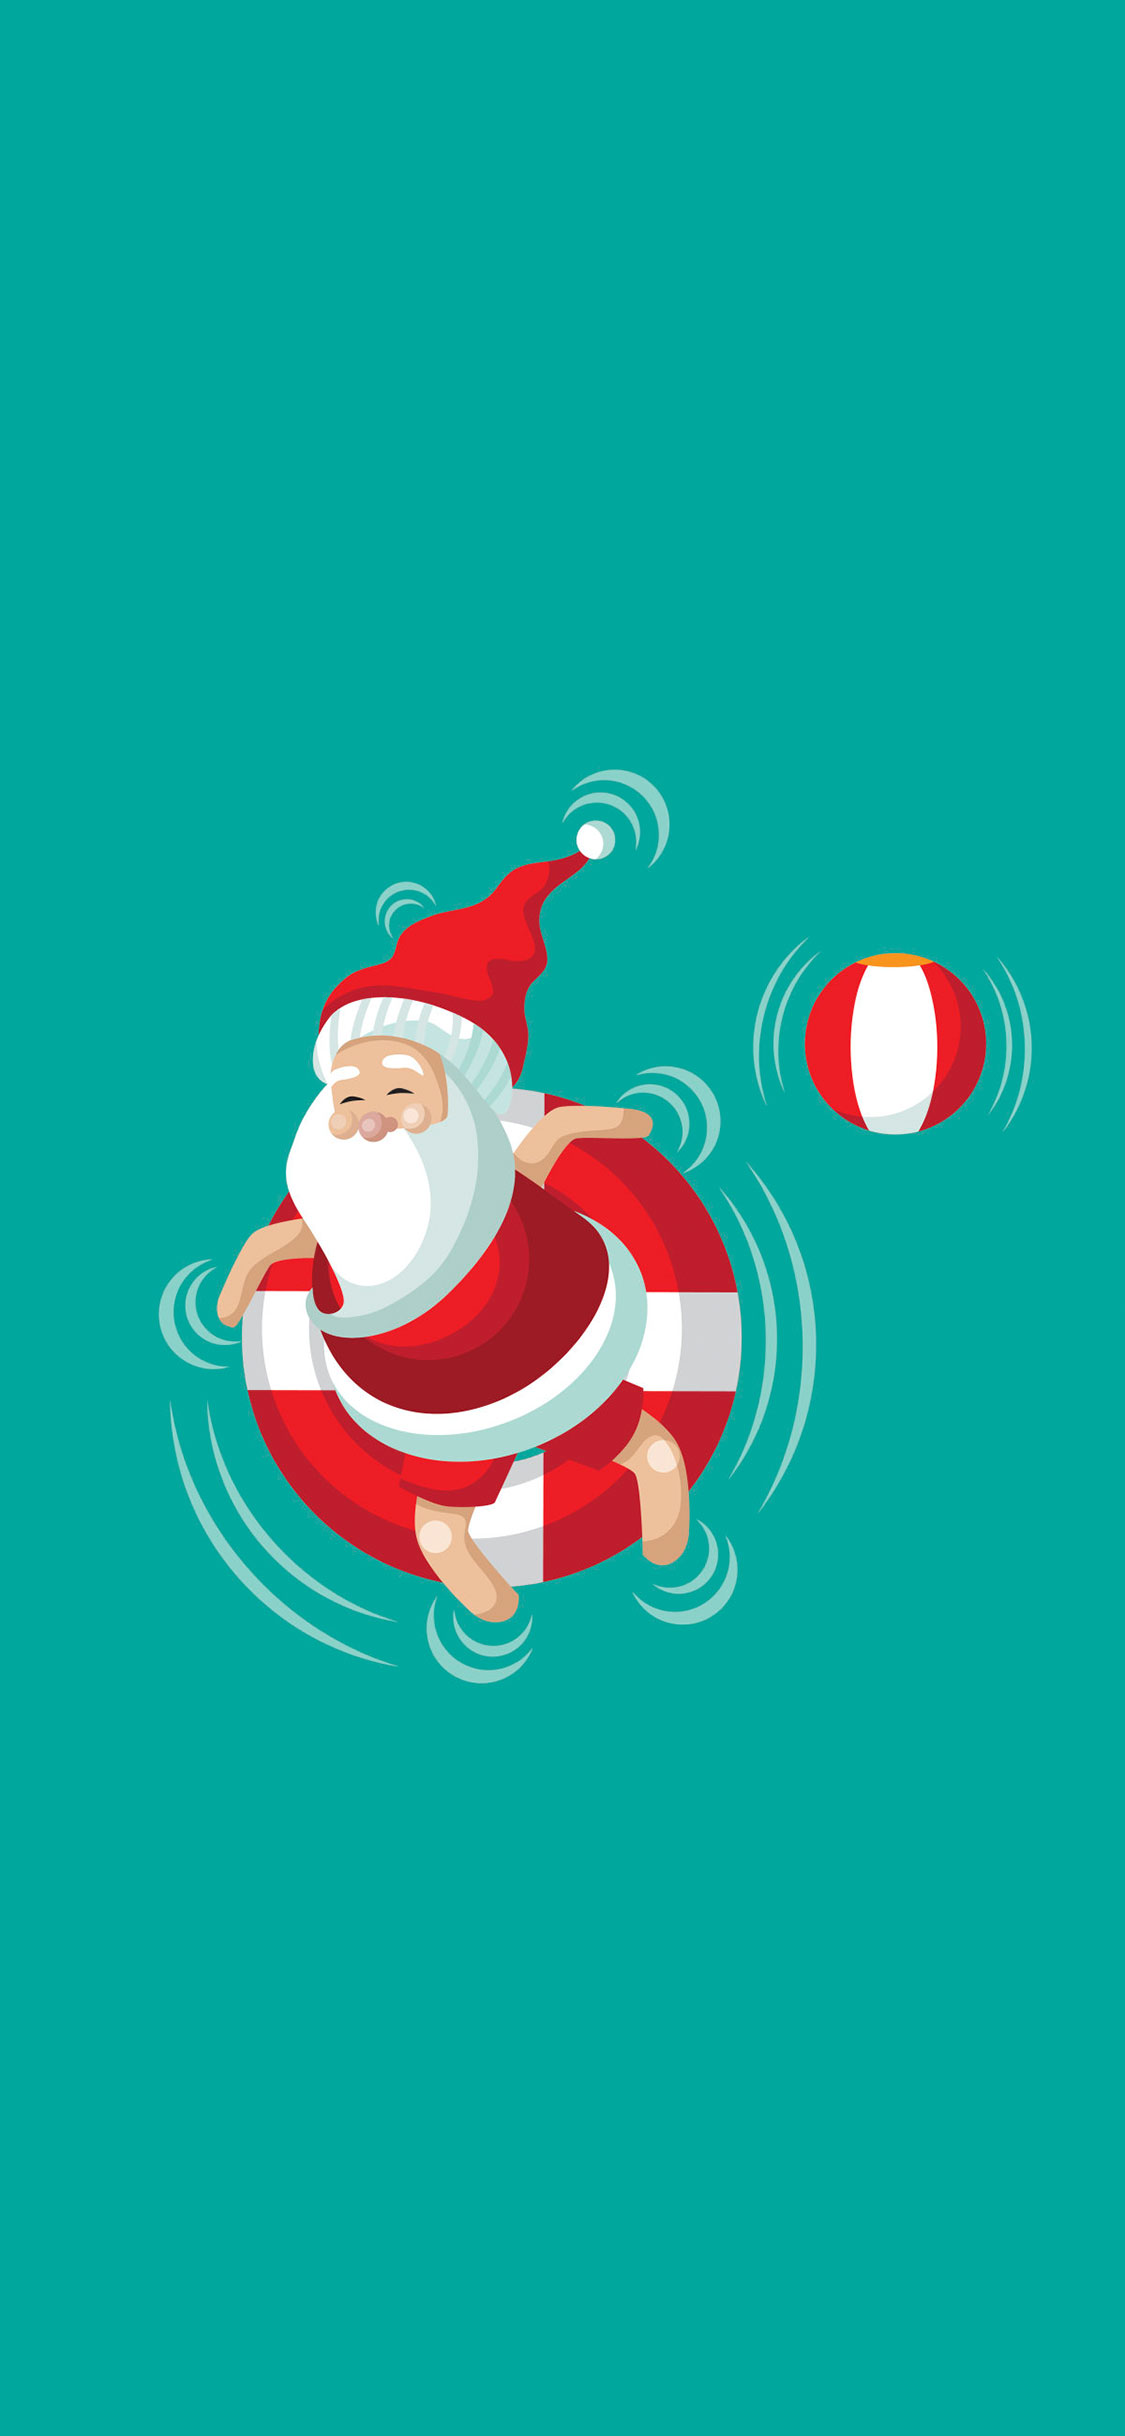 Red Santa With Green Background.jpg